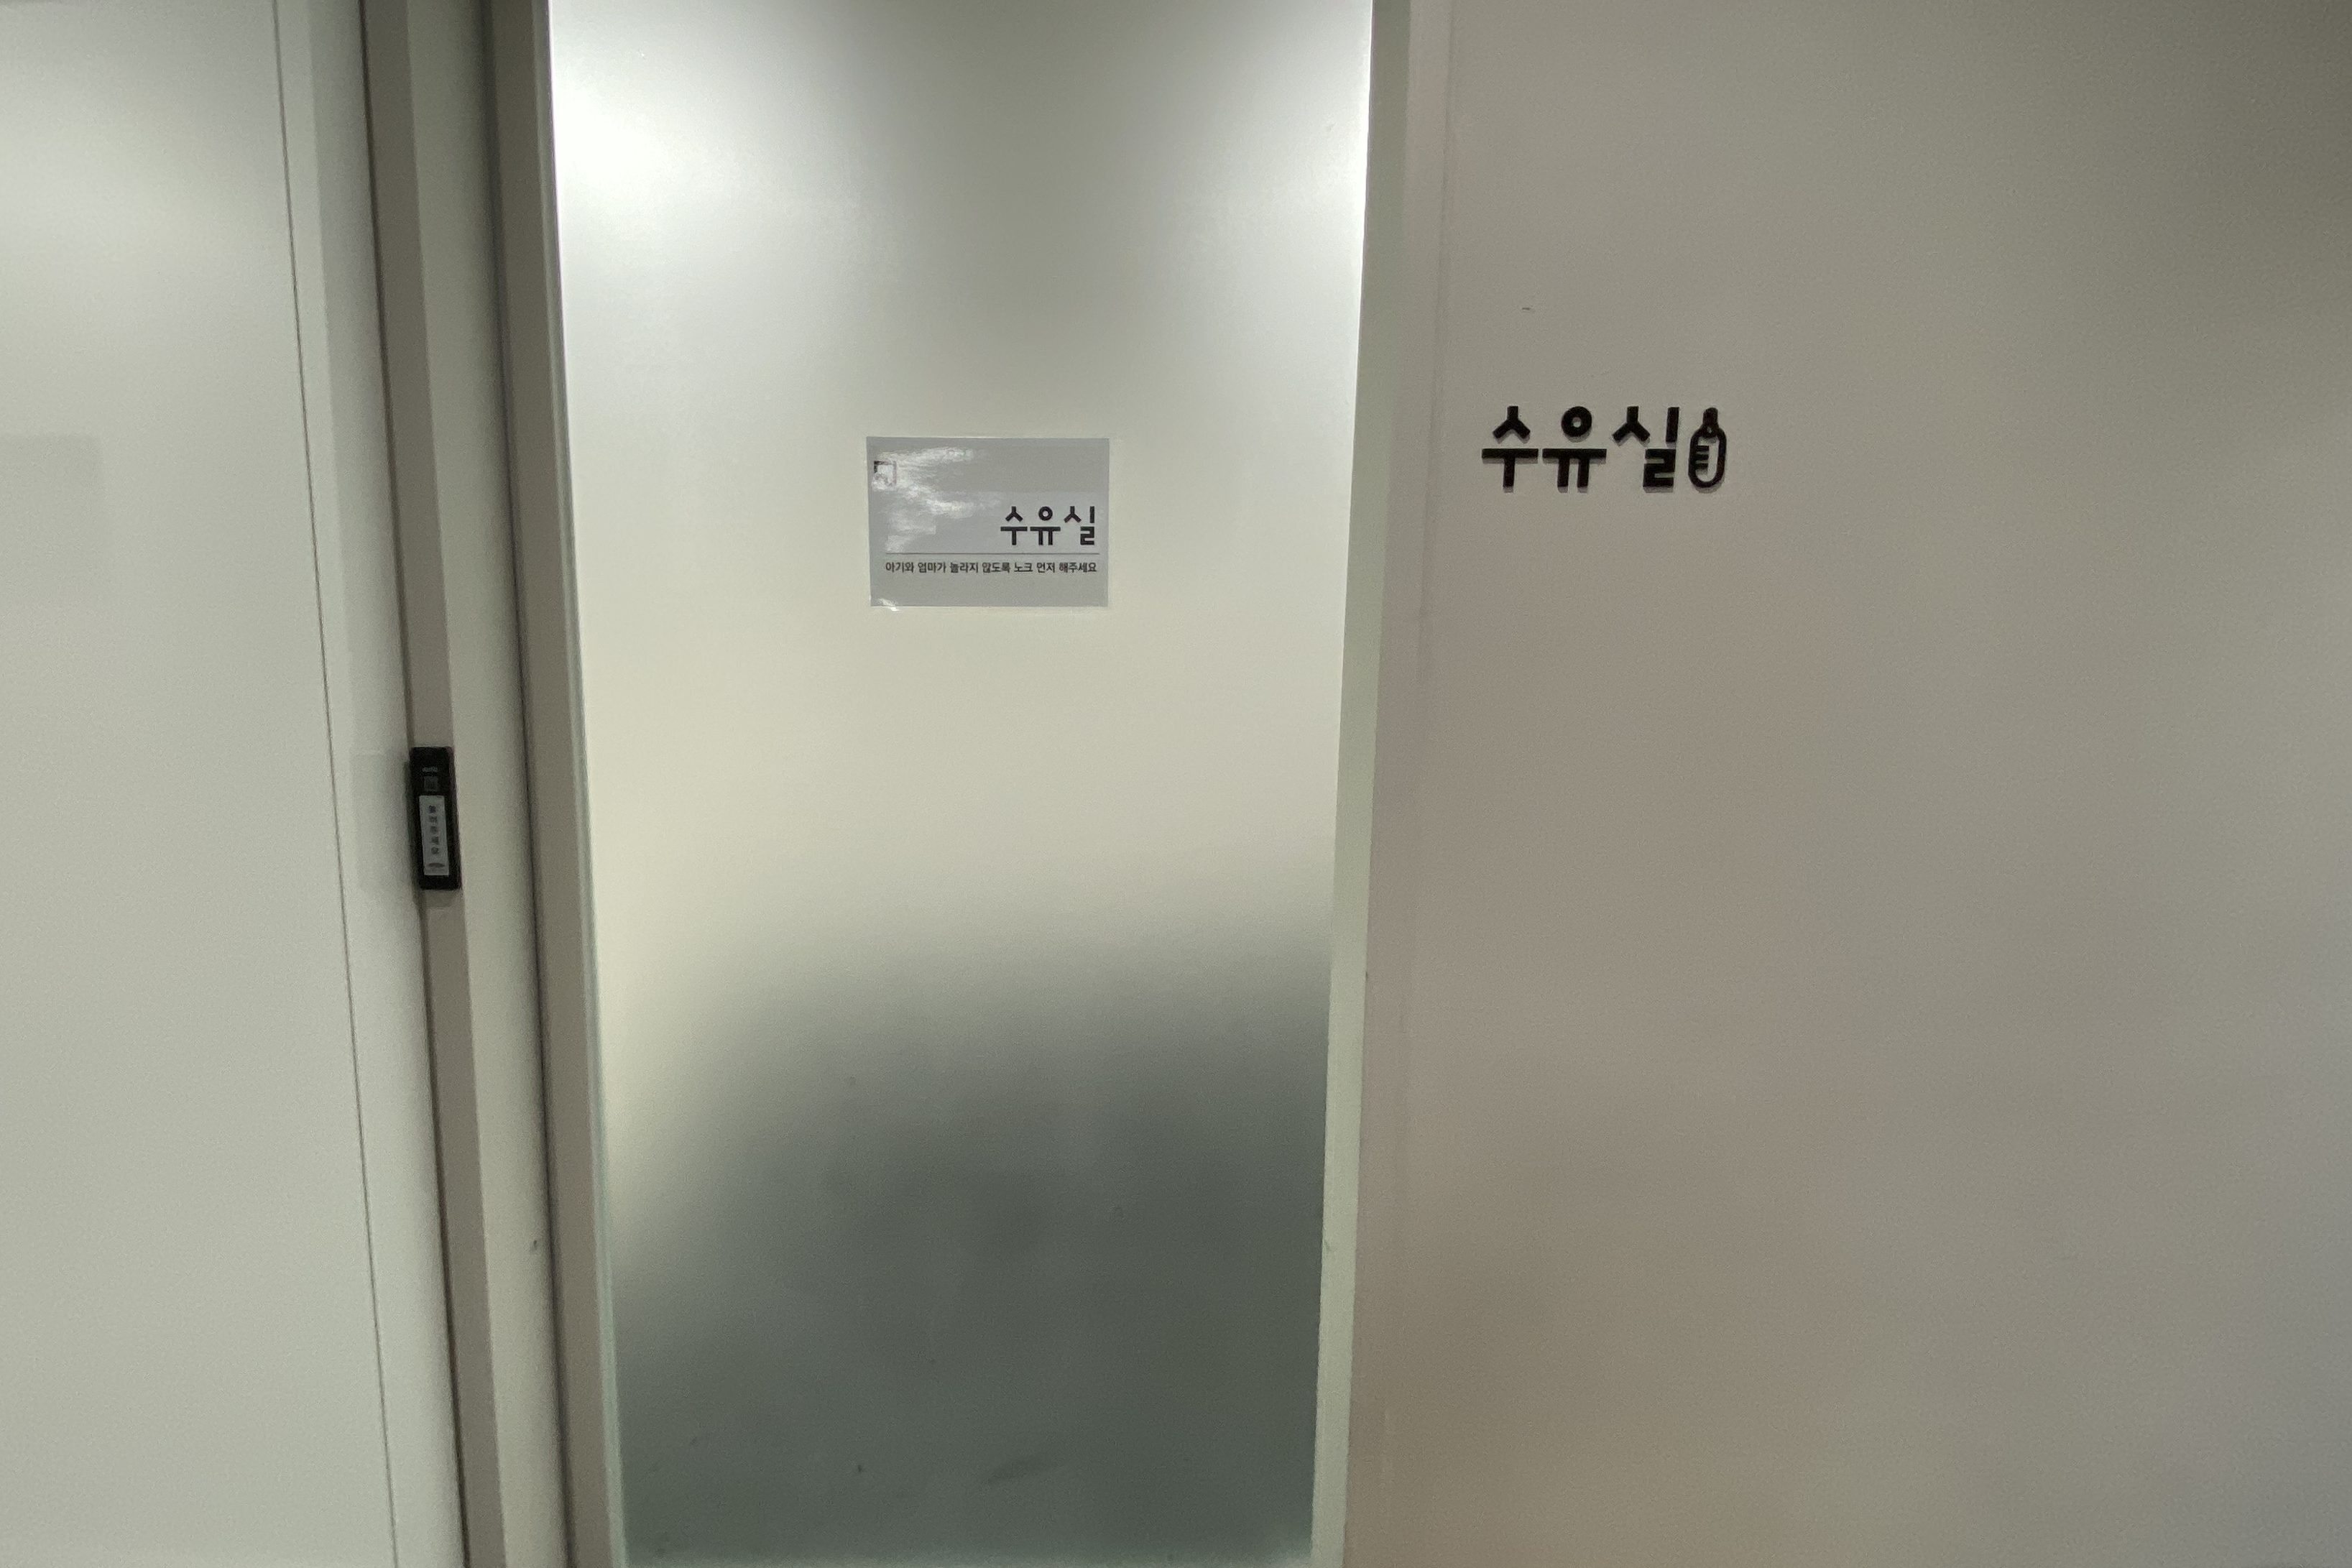 Facilities for pregnant women or family with children0 : Entrance of the nursing room at Ttukseom Observatory & Culture Complex